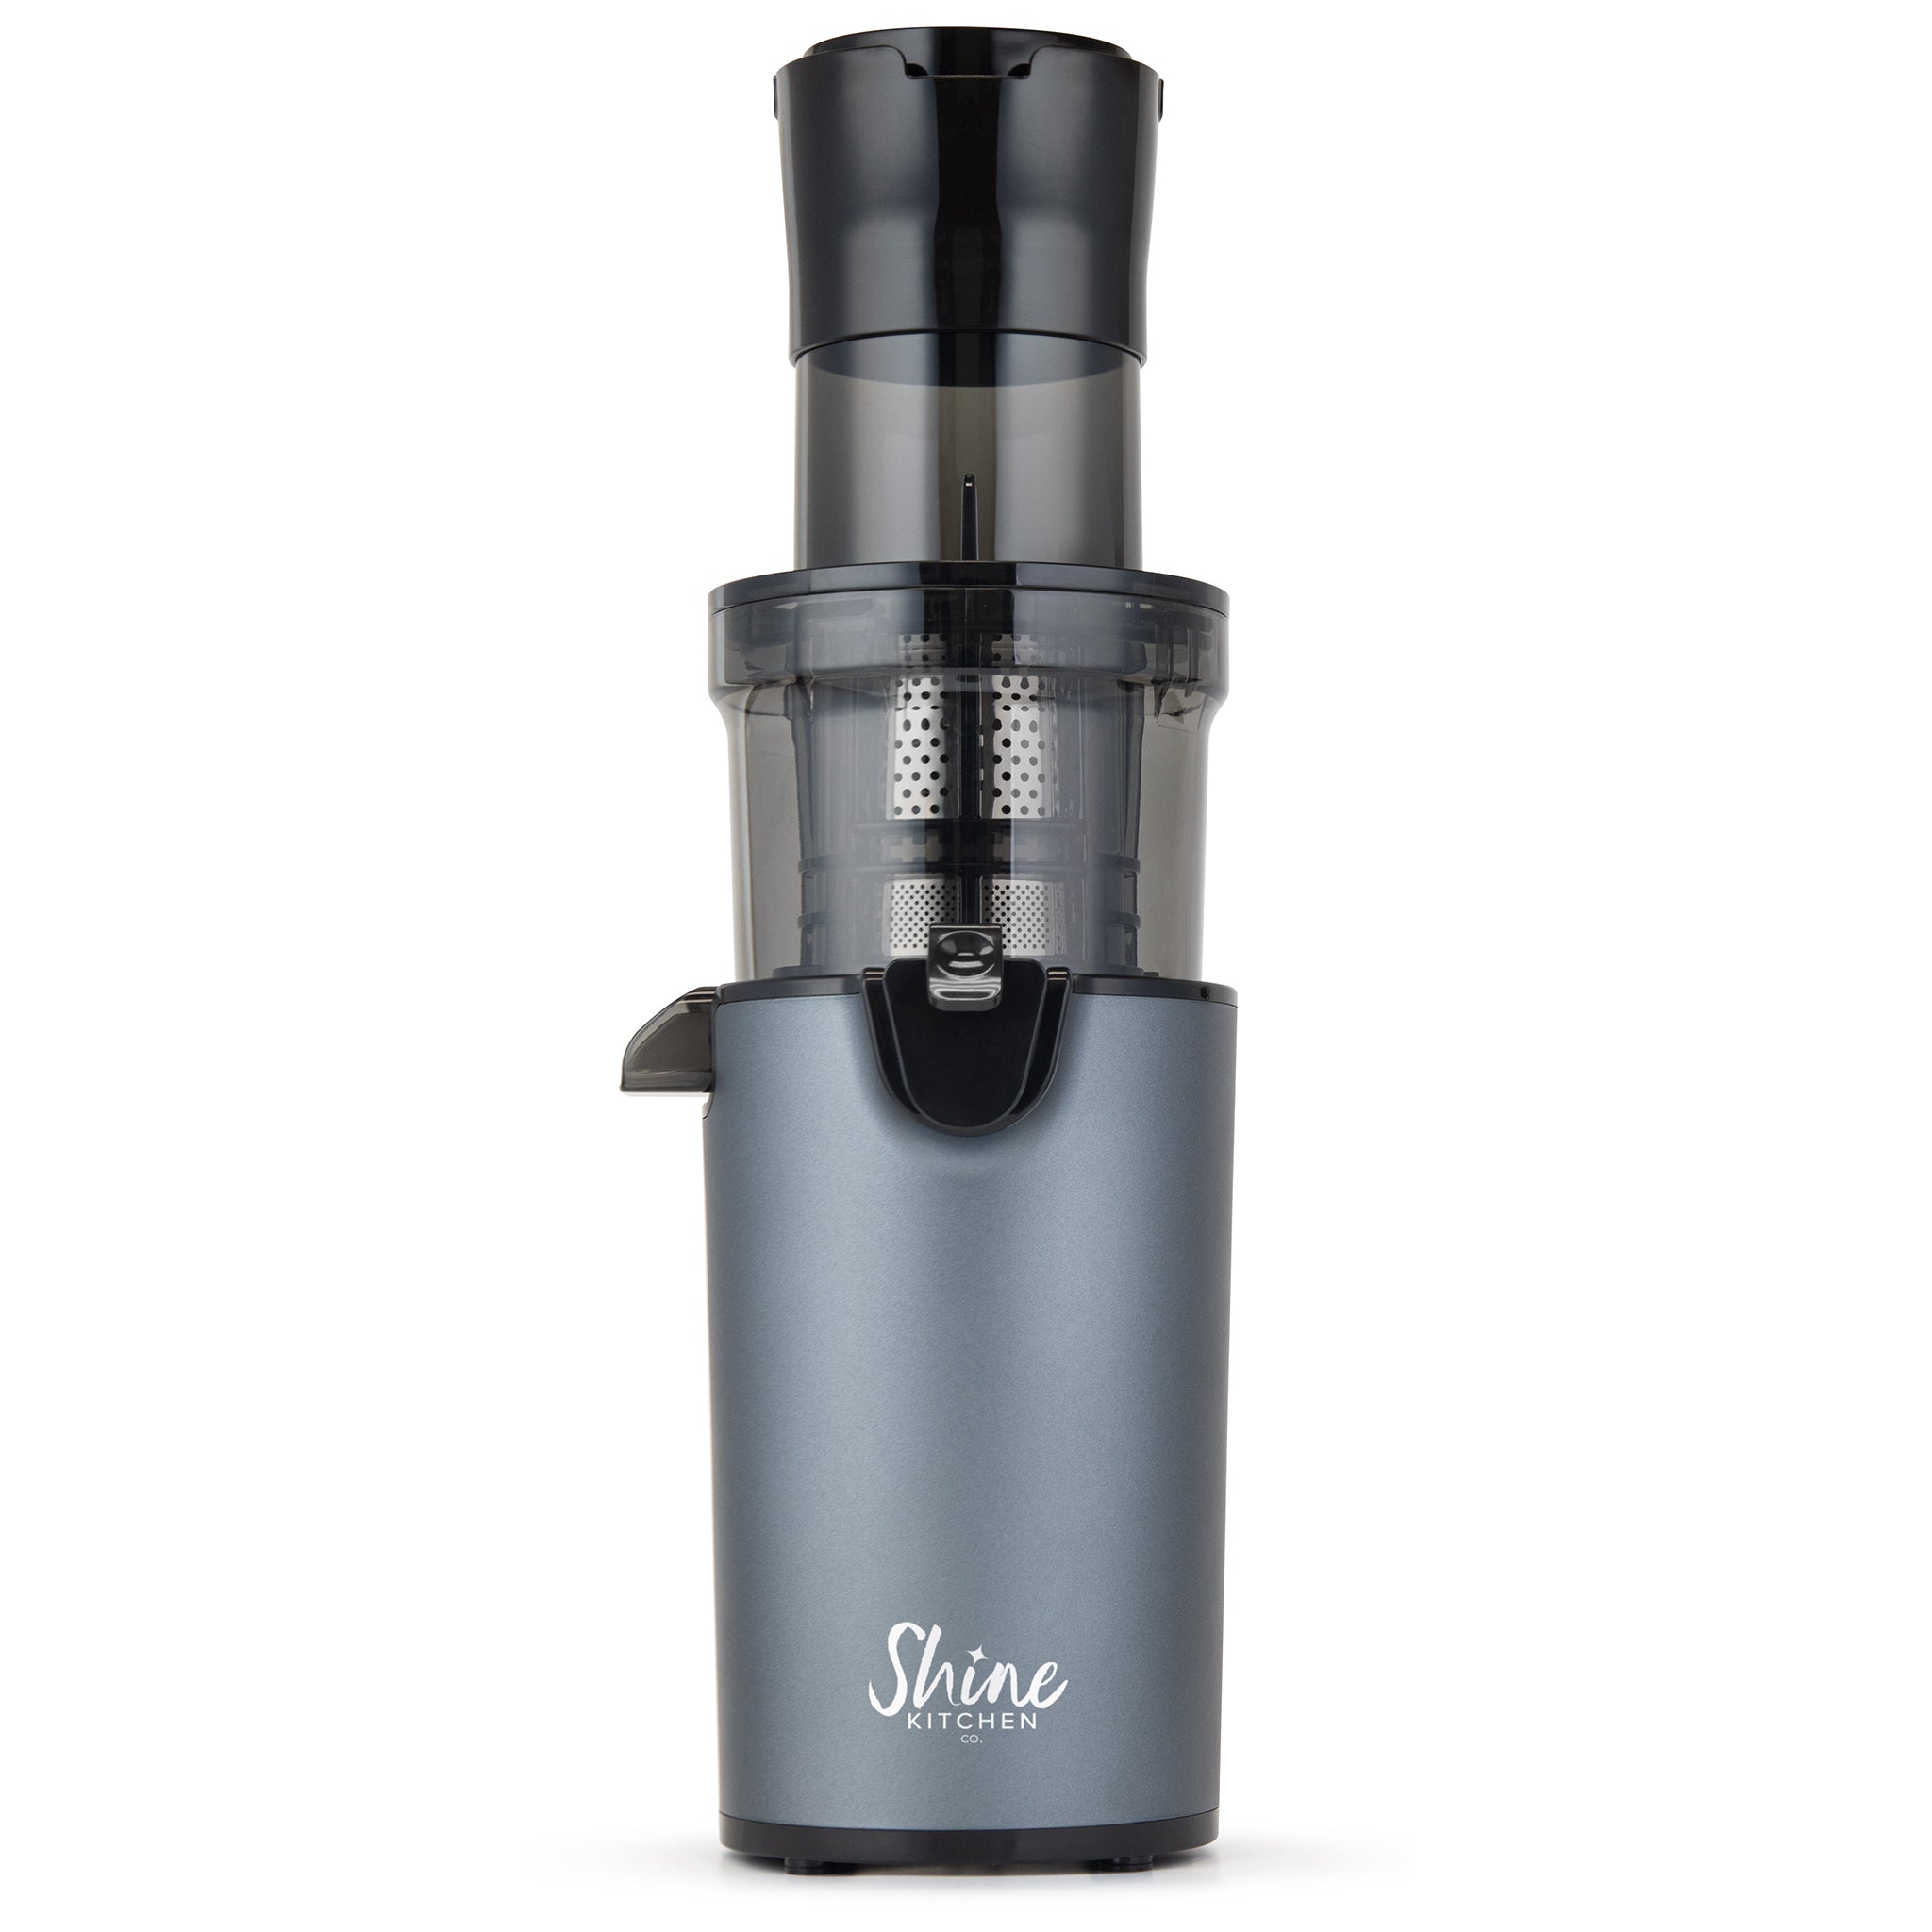 The 11 Best Cold-Press Juicers in 2023 - Cold-Press Juicer Reviews